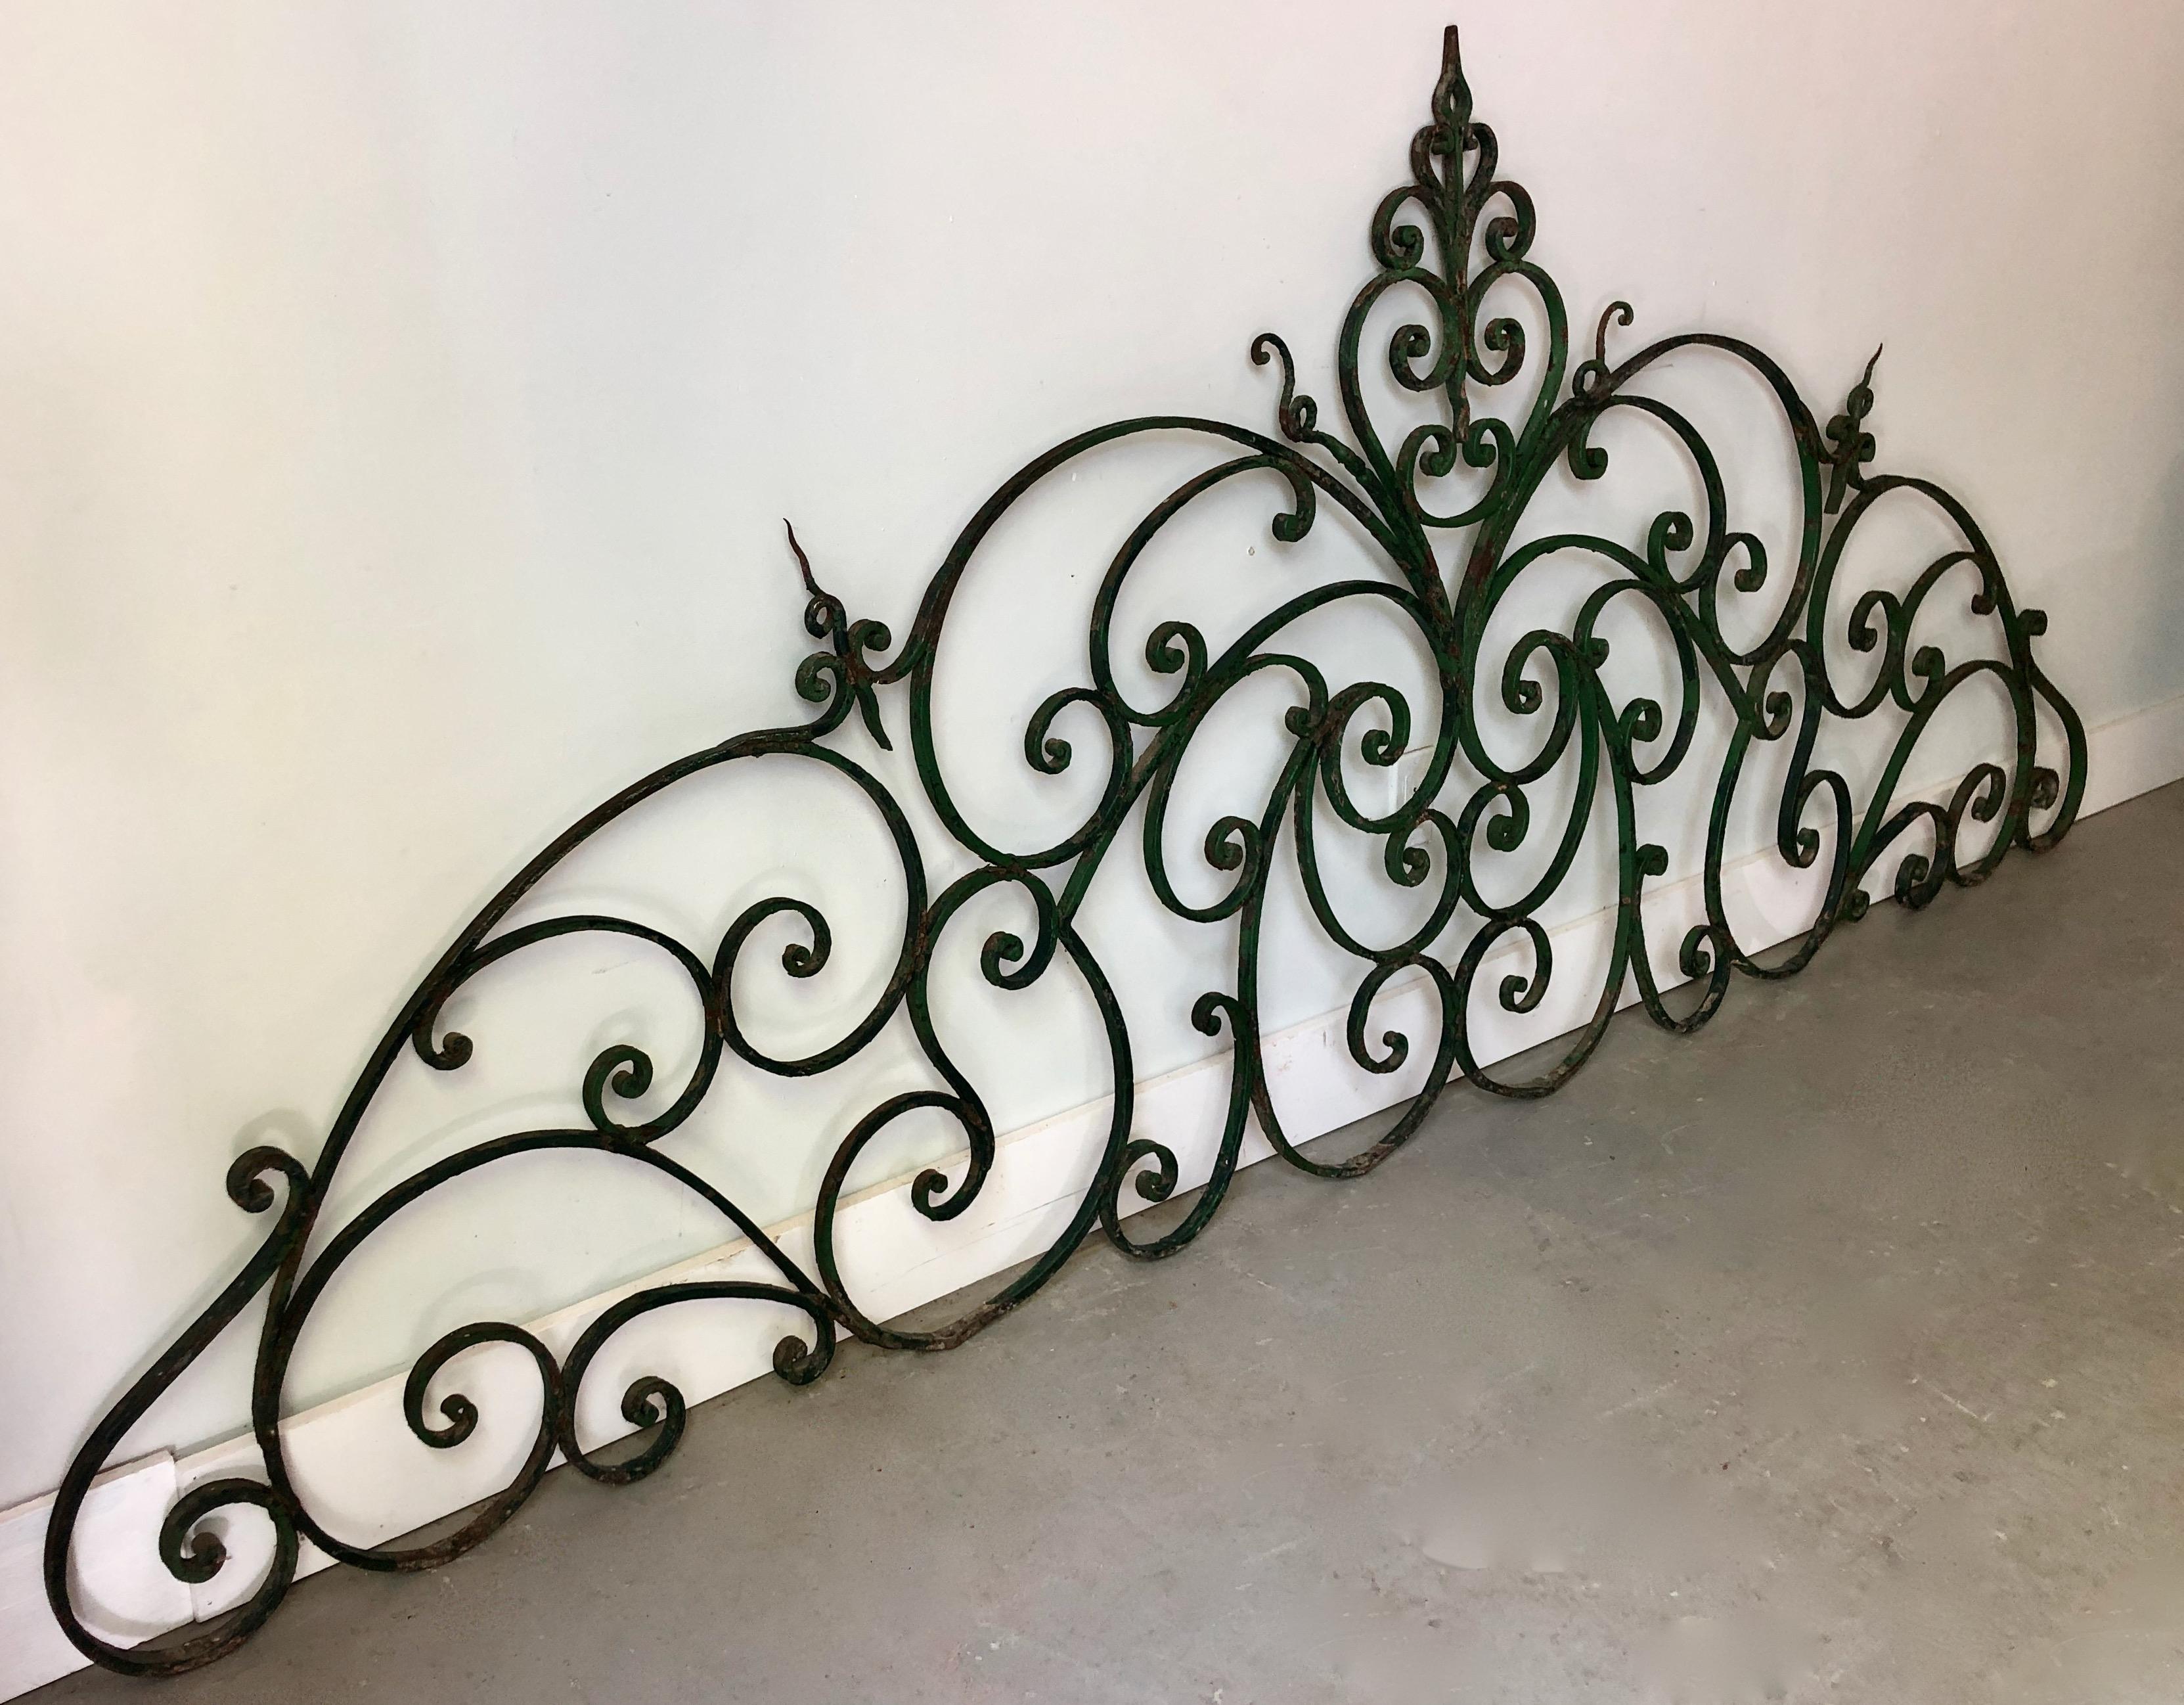 19th century French Large iron gate pediment.
A great architectural addition for any decor.